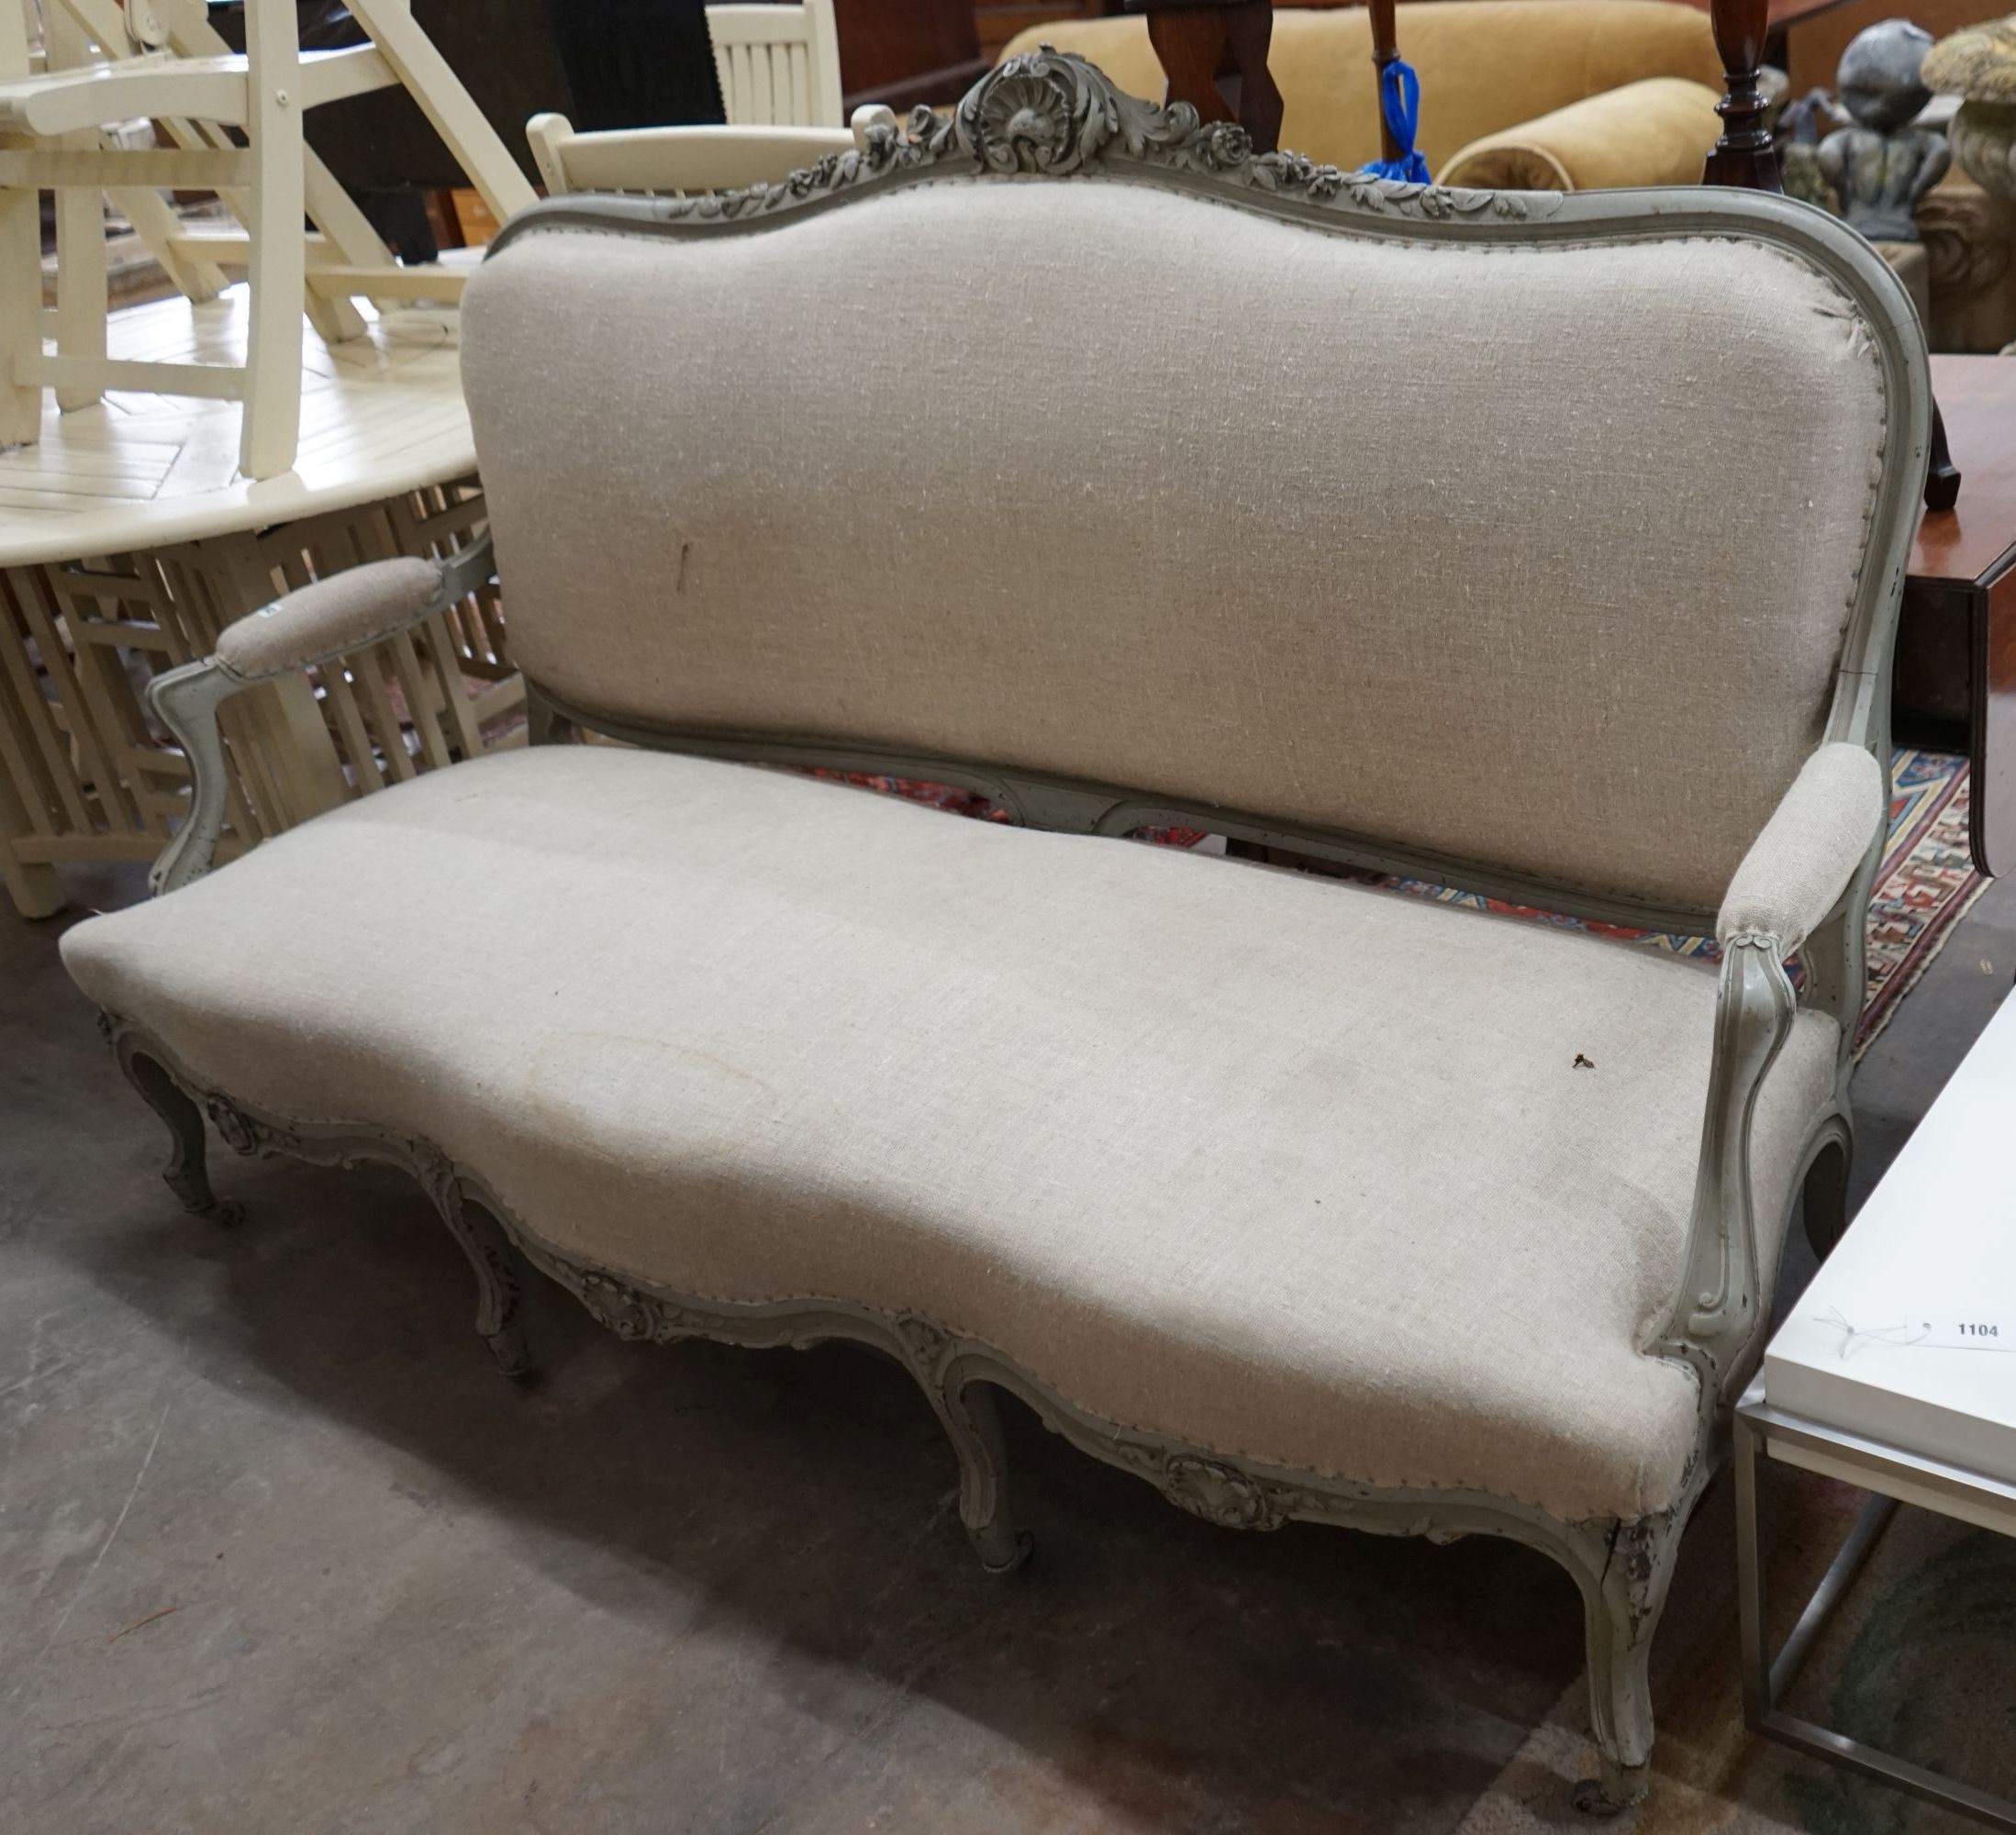 A 19th century French carved wood settee upholstered in a natural linen type fabric, re-painted in grey, length 180cm, depth 60cm, height 102cm